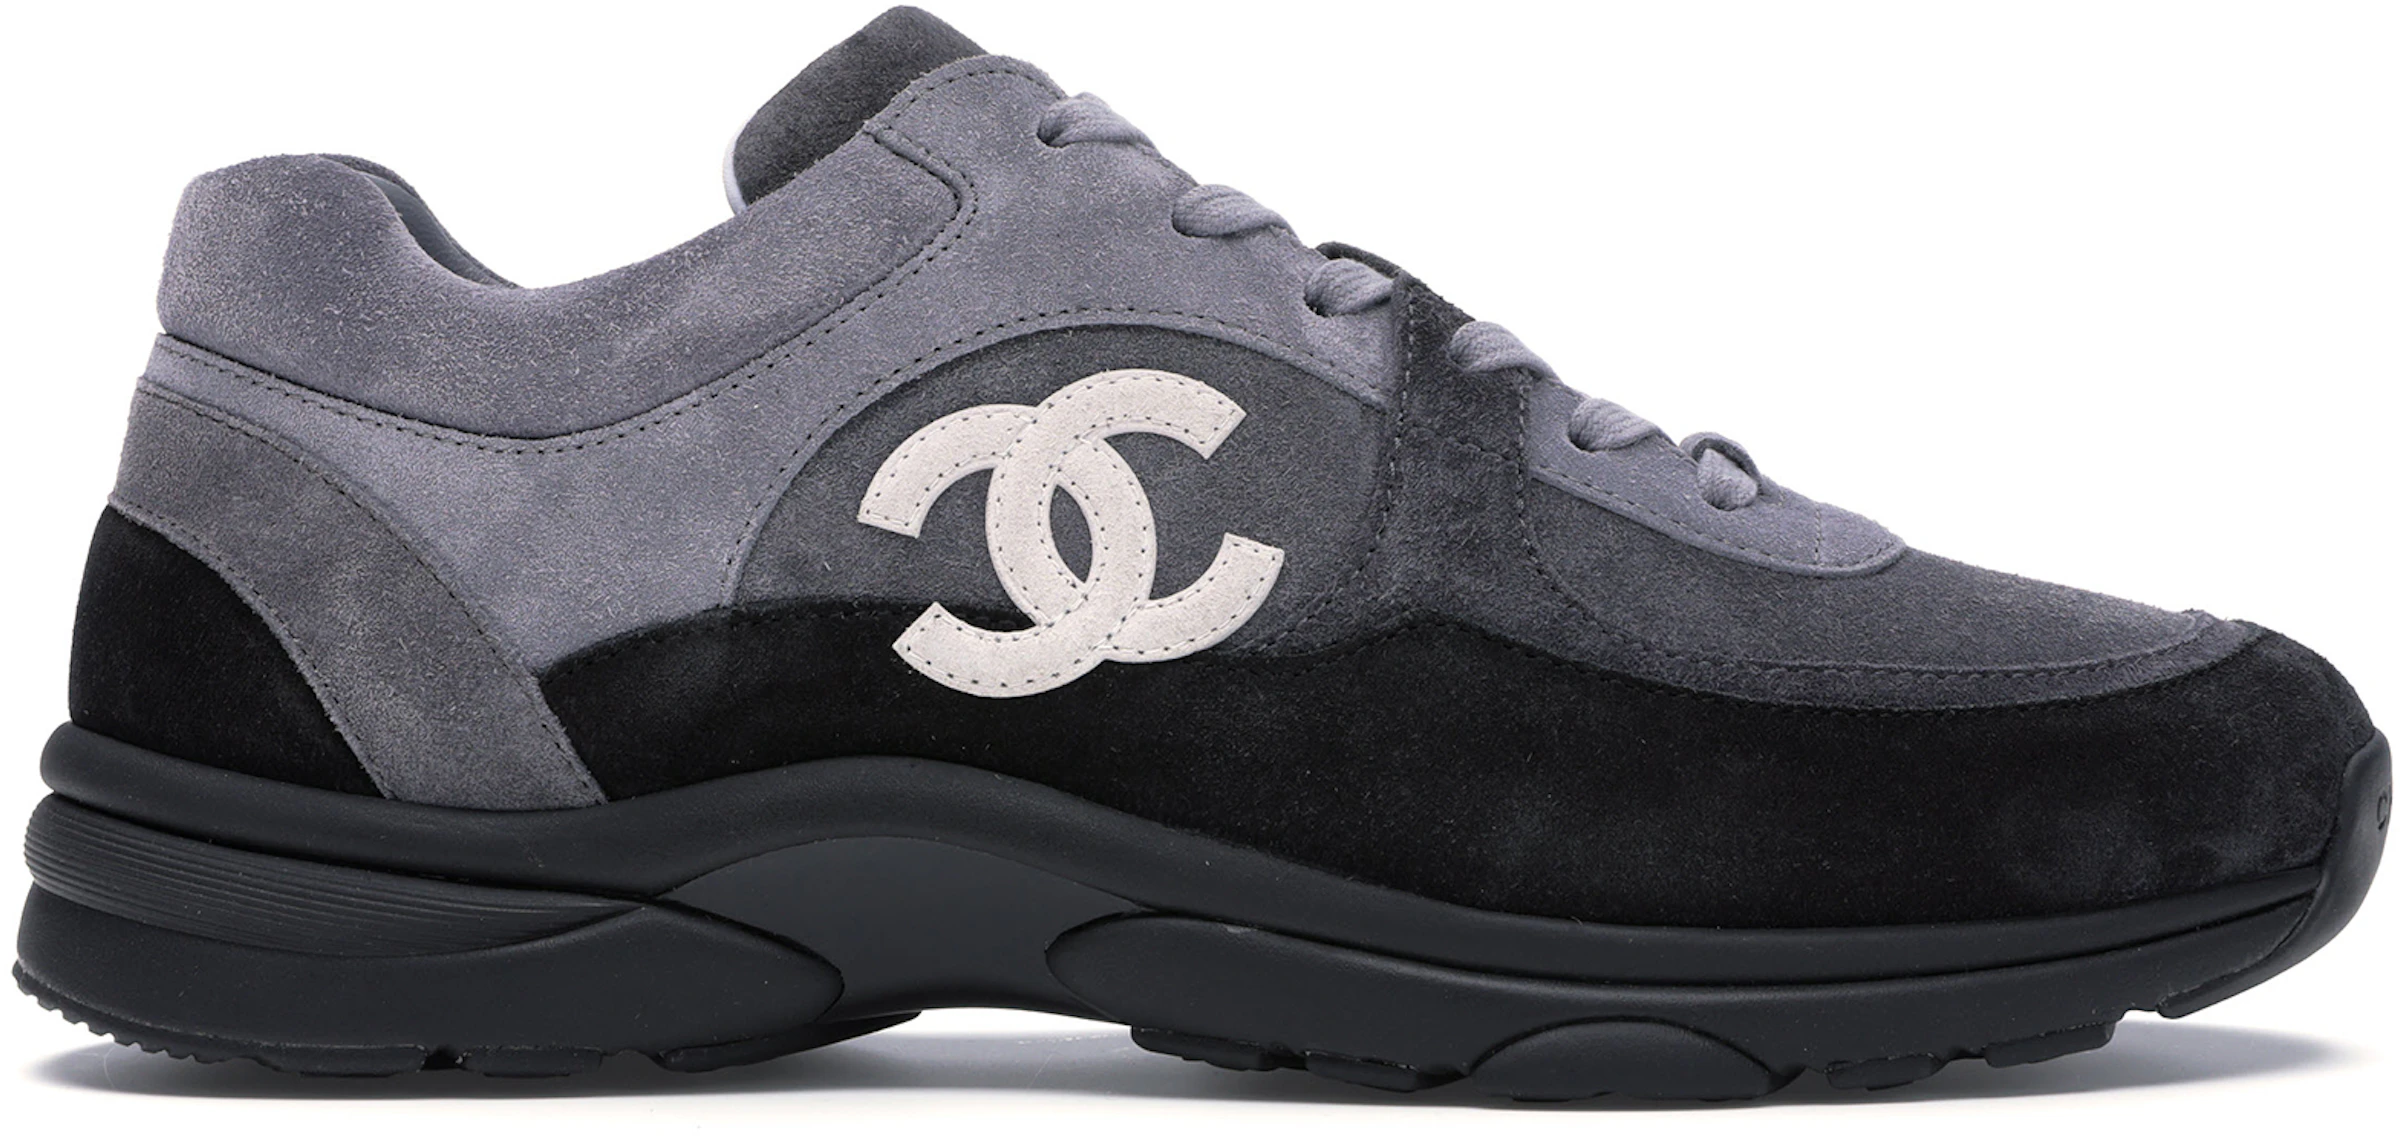 Actualizar 38+ imagen black and gray chanel sneakers - Giaoduchtn.edu.vn